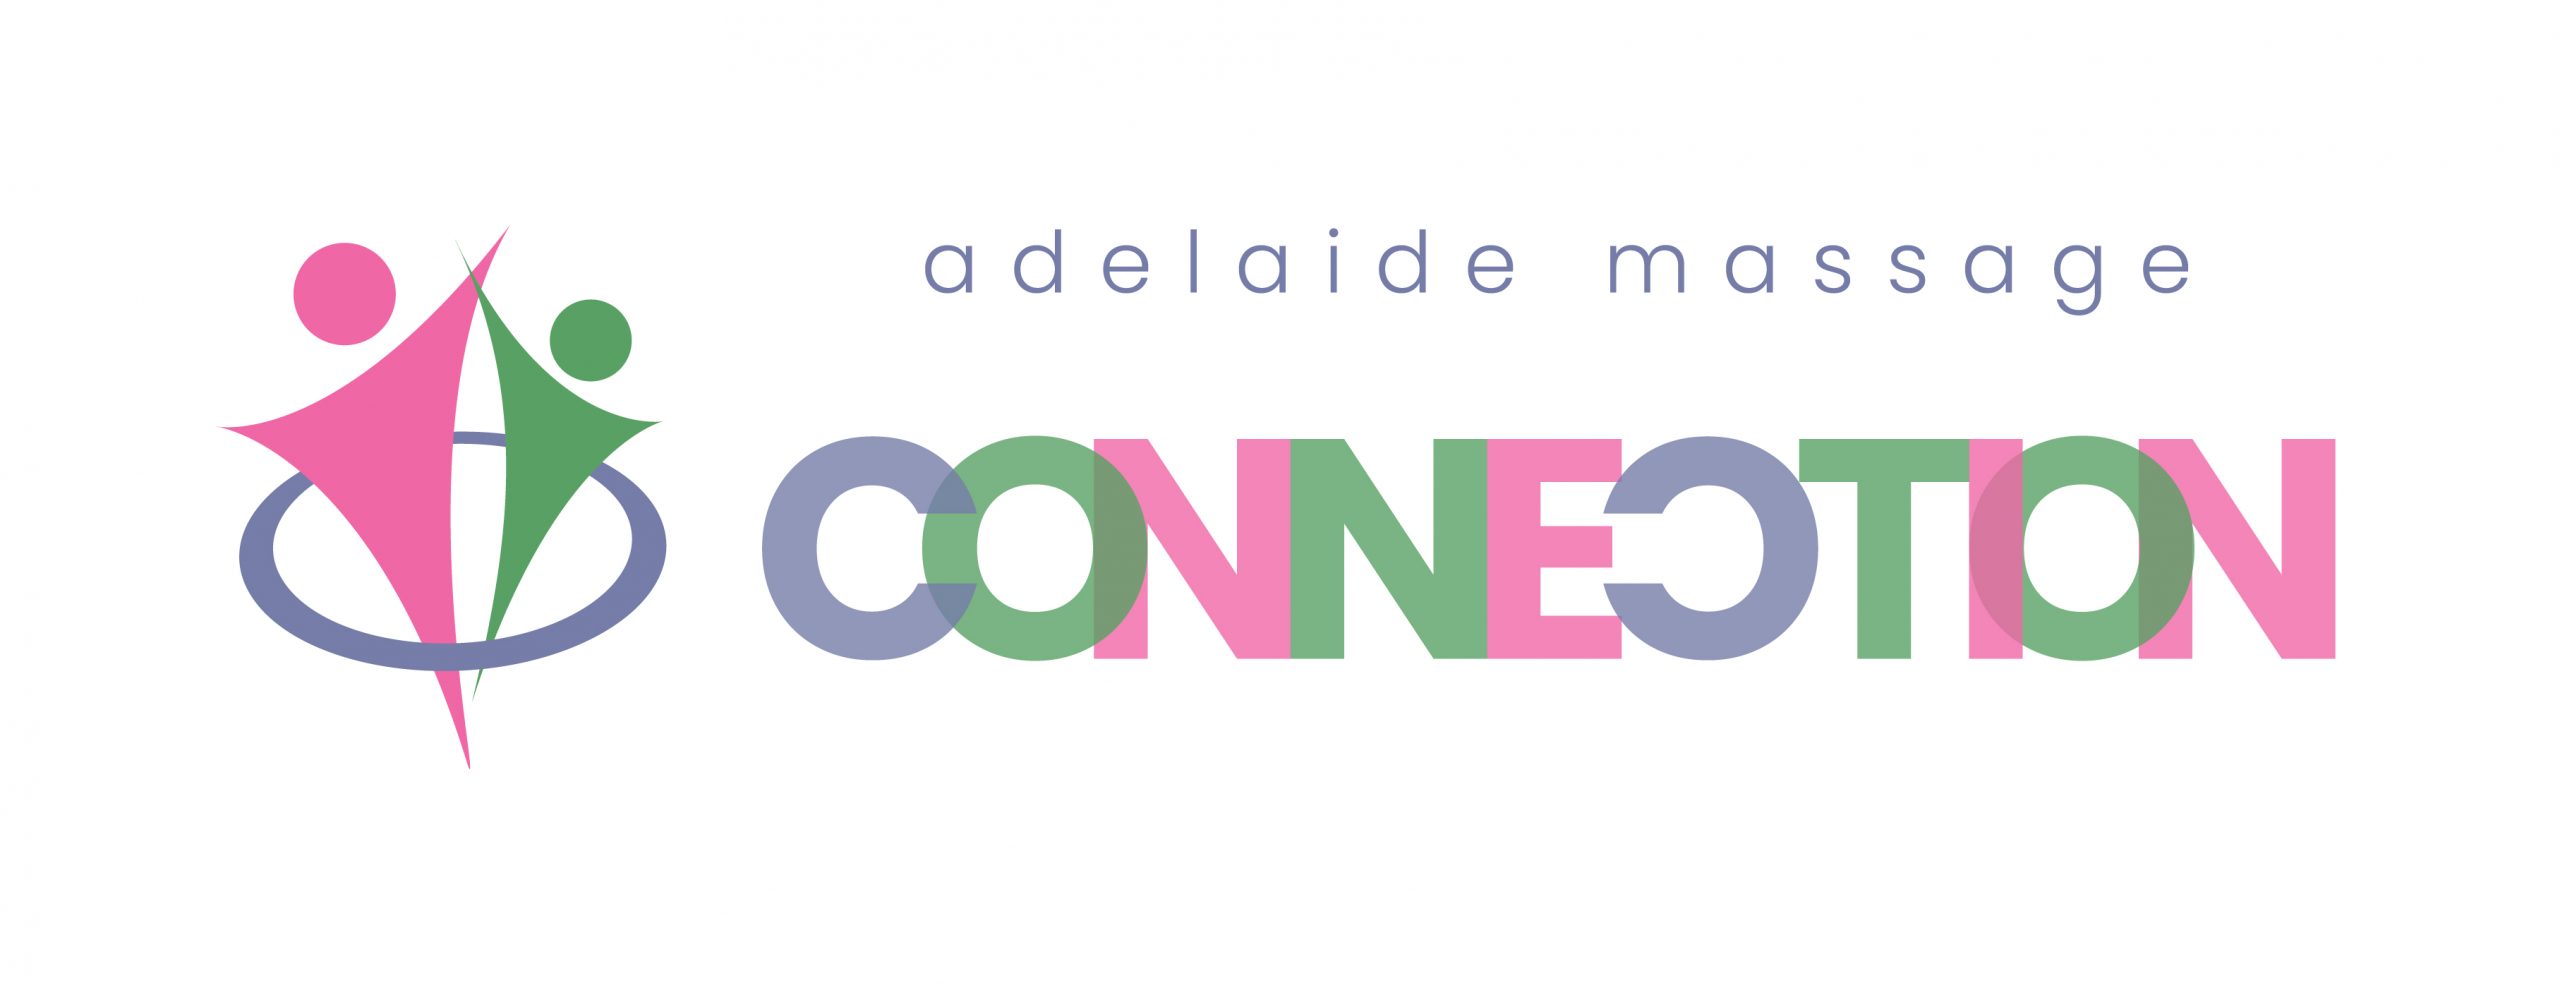 Adelaide Massage Connection